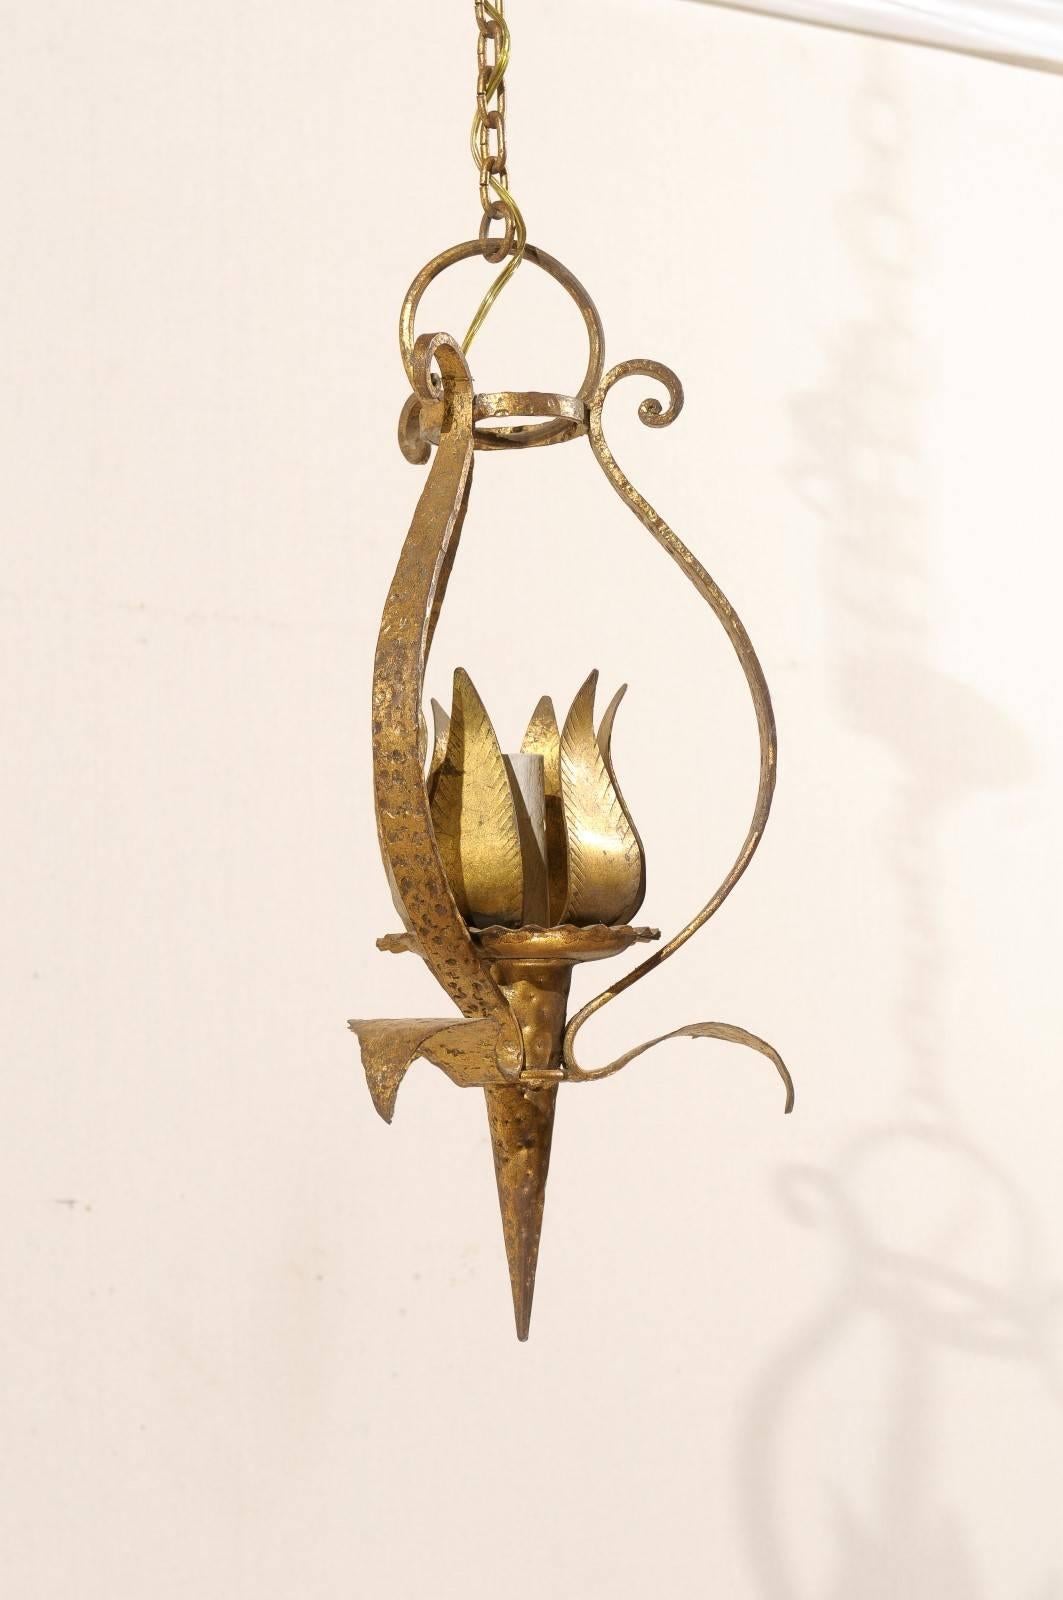 French Tulip-Shaped, Single-Light, Hammered & Gilt Metal Chandelier, Mid 20th C. In Good Condition For Sale In Atlanta, GA